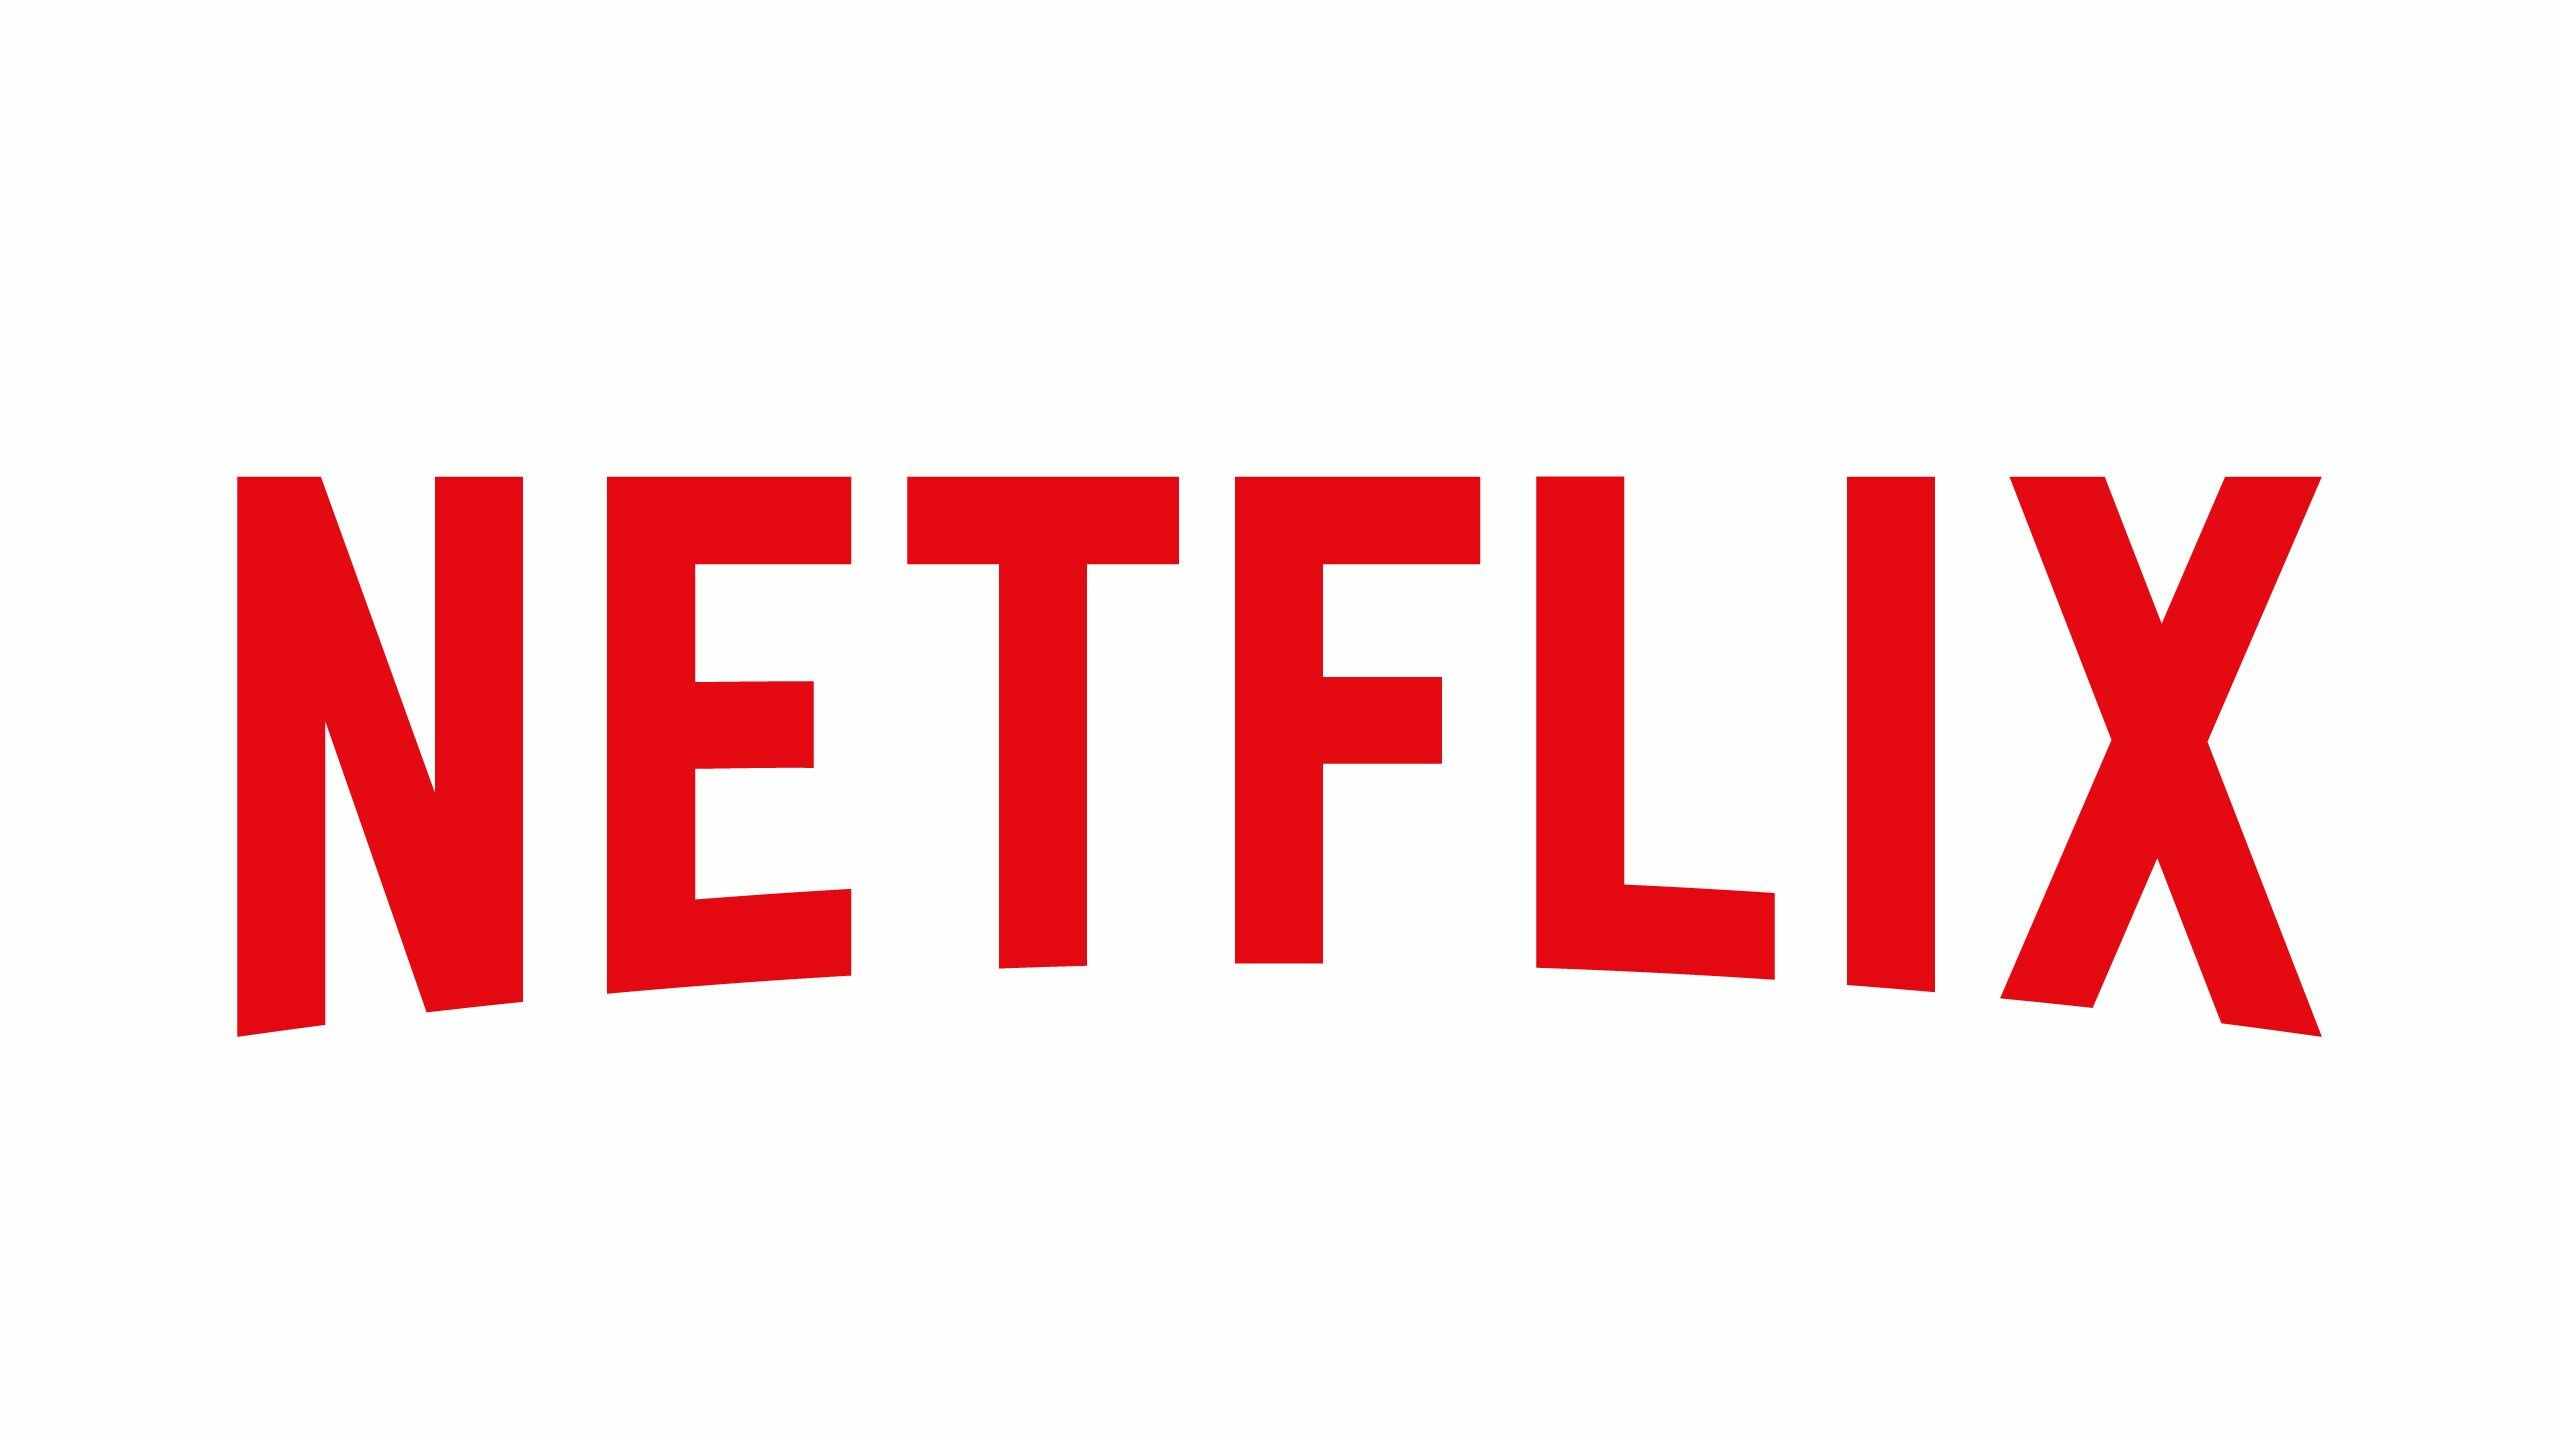 Netflix: In January 2007, the company launched a streaming media service, introducing video on demand via the Internet. 2560x1440 HD Wallpaper.